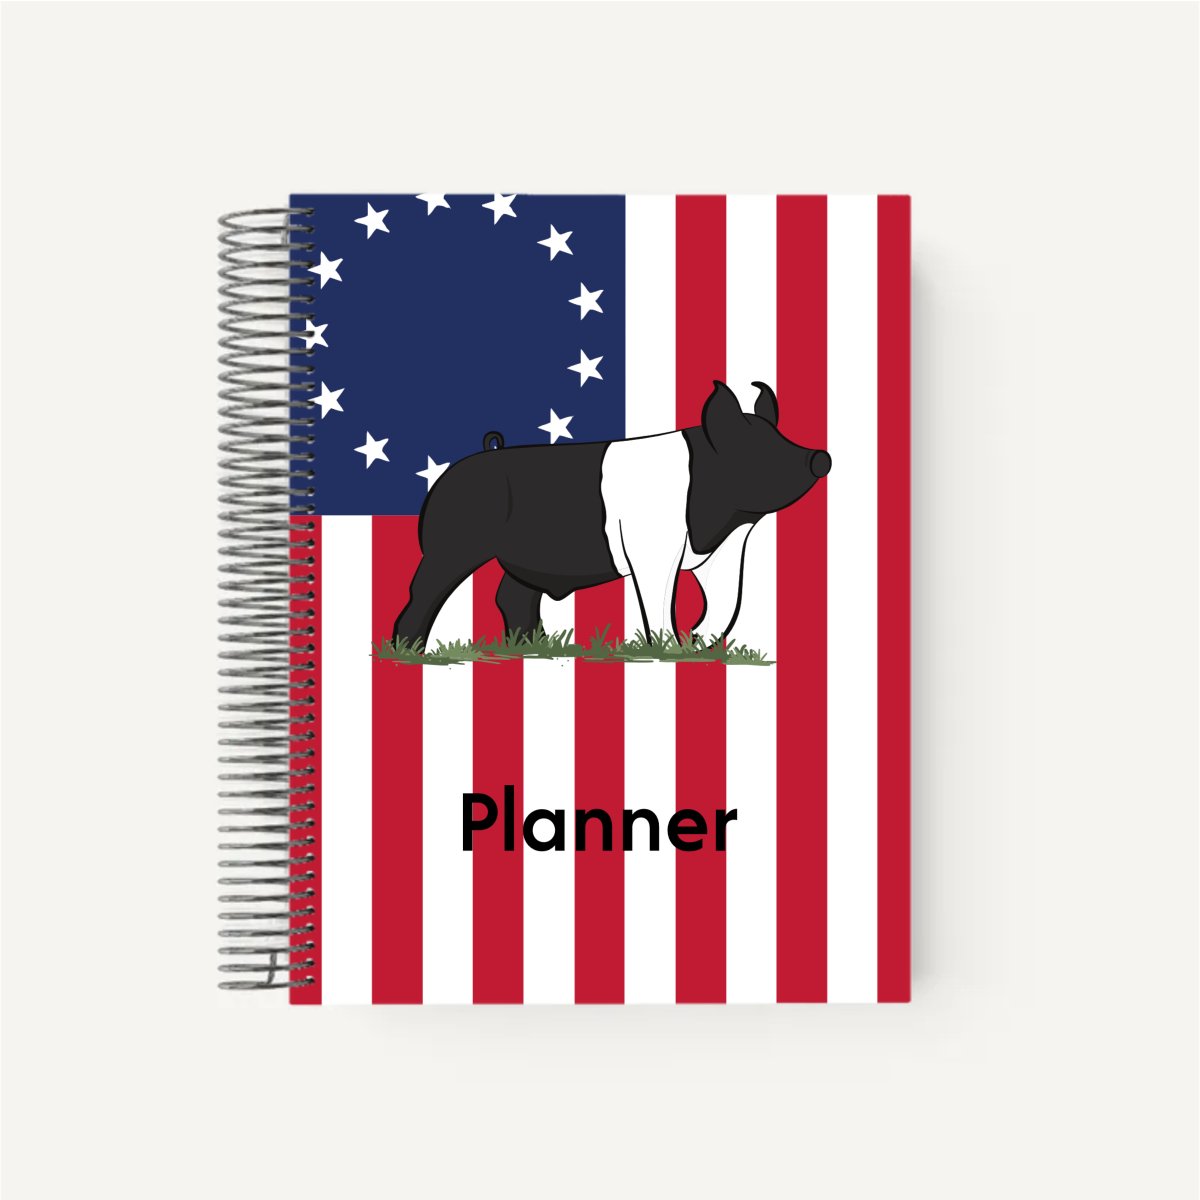 Personalized-Livestock-Daily Planner - Patriotic Cover